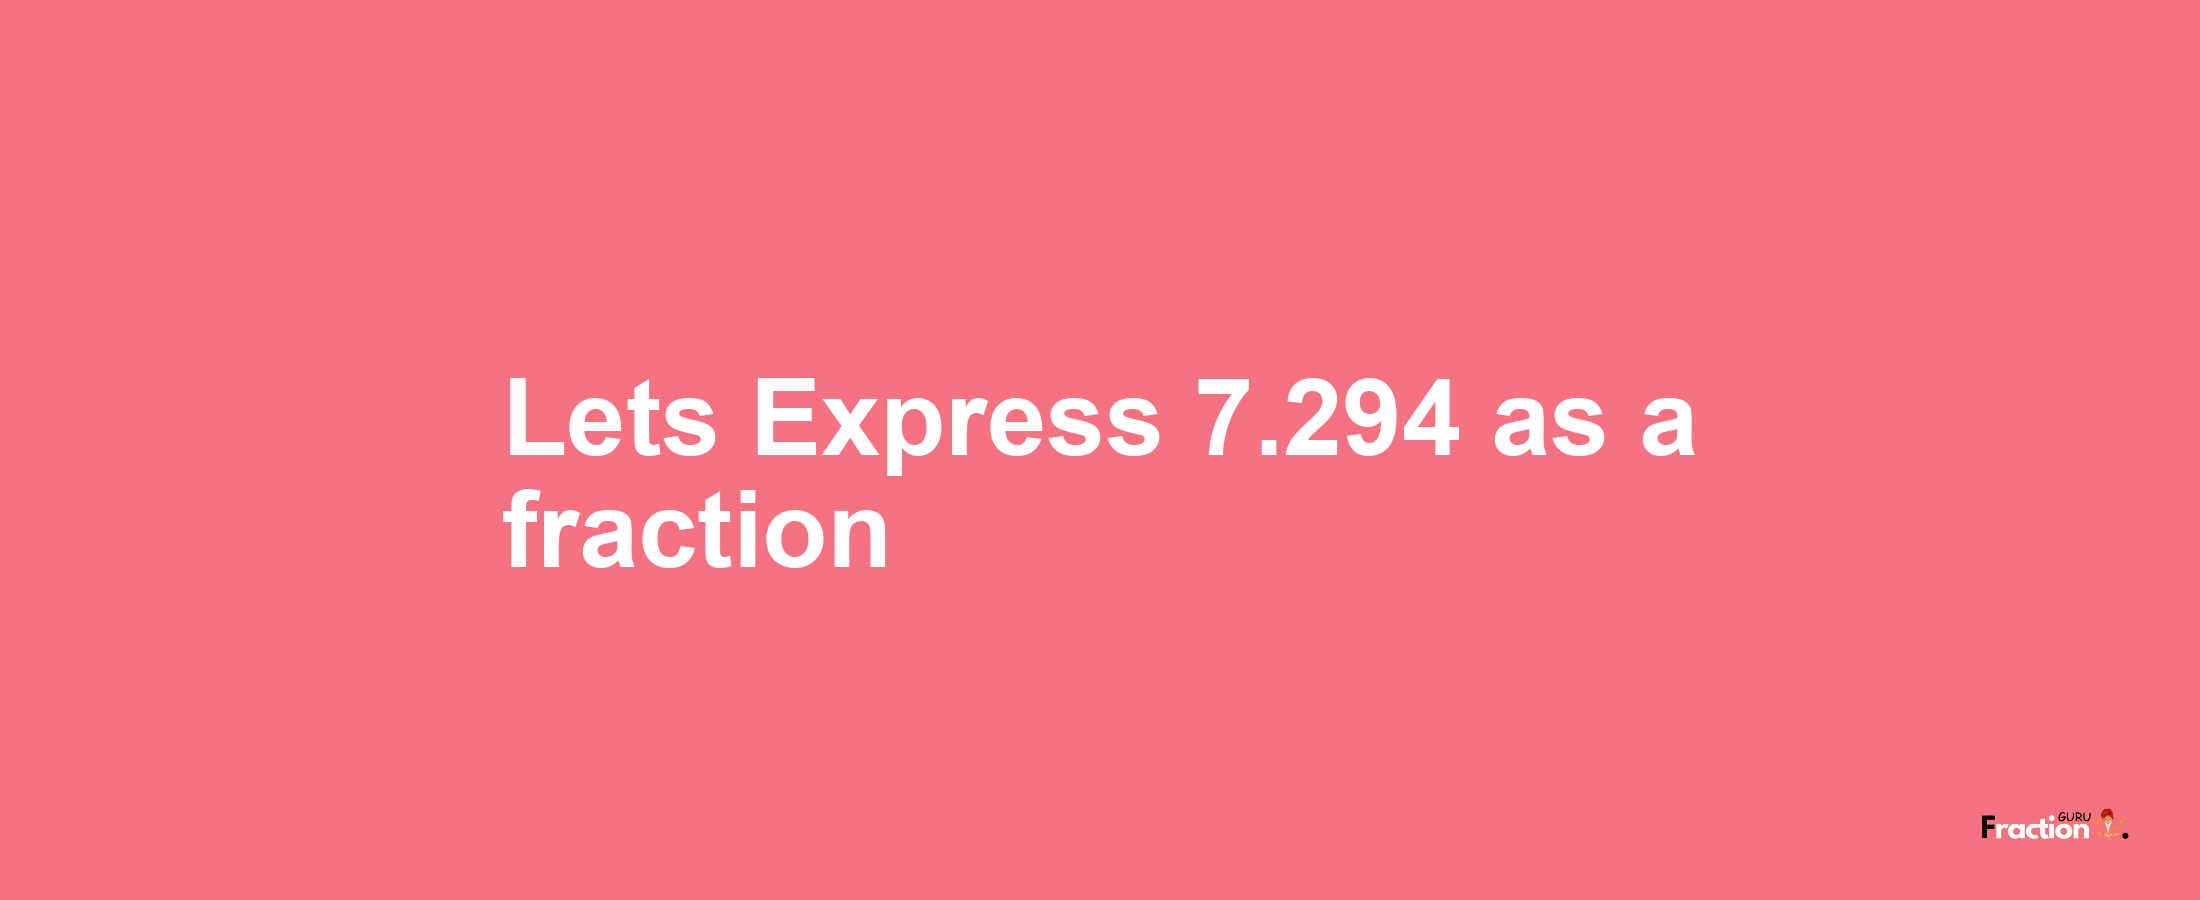 Lets Express 7.294 as afraction